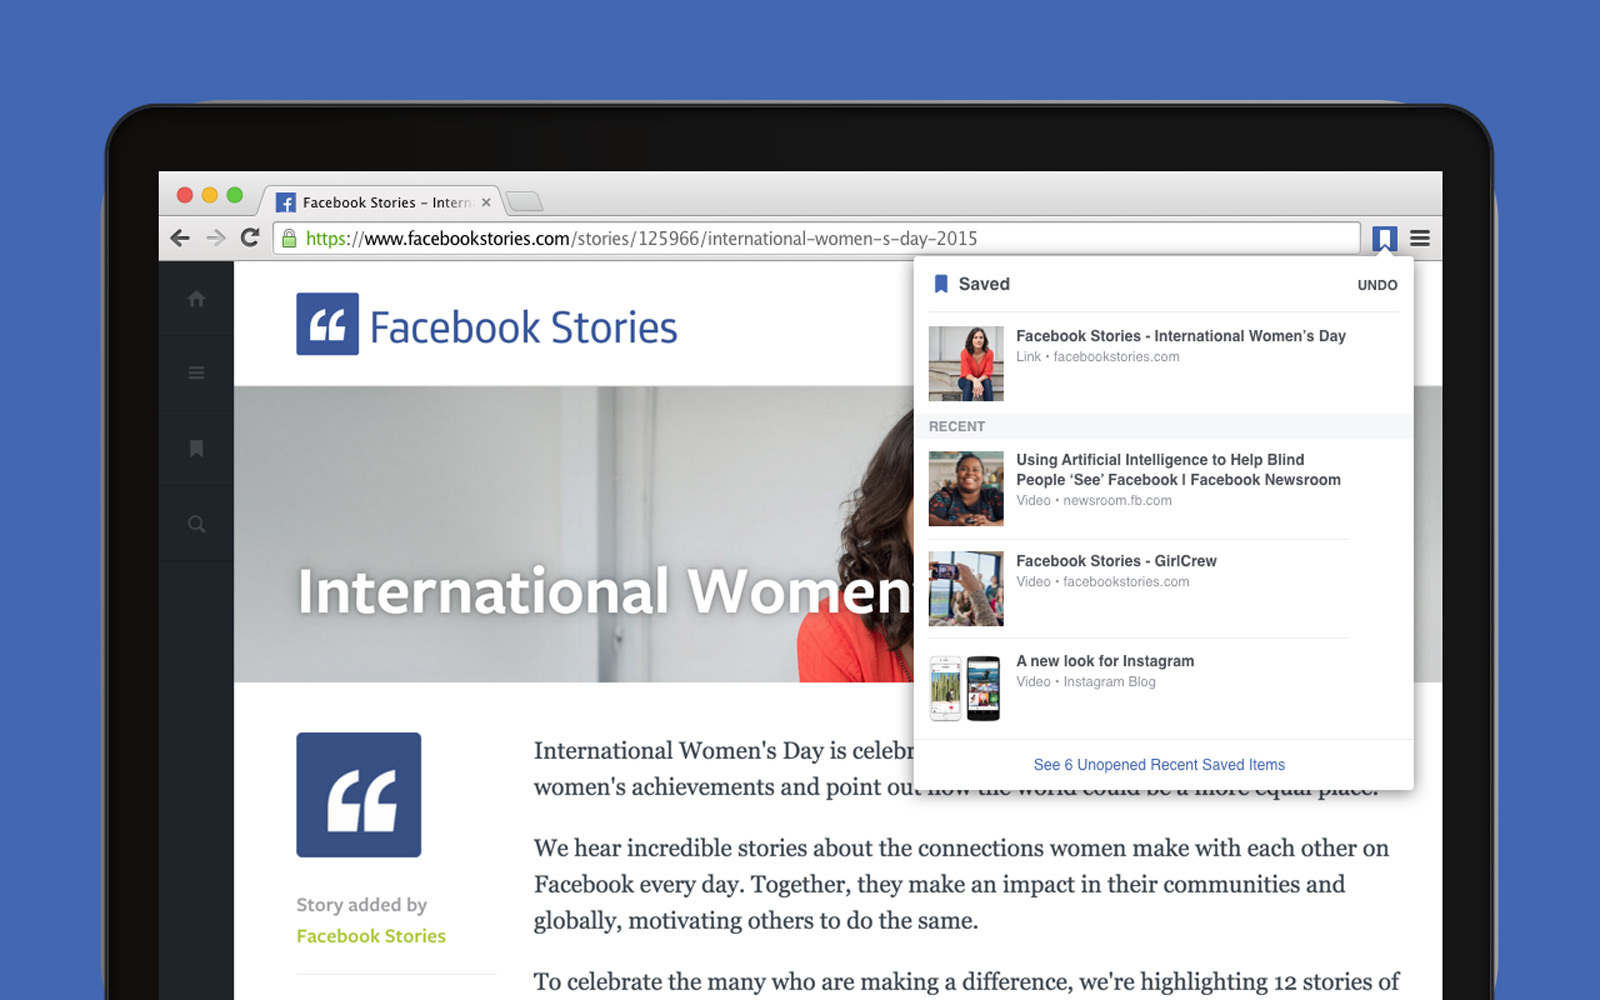 Facebook also added 2 new Chrome Extensions